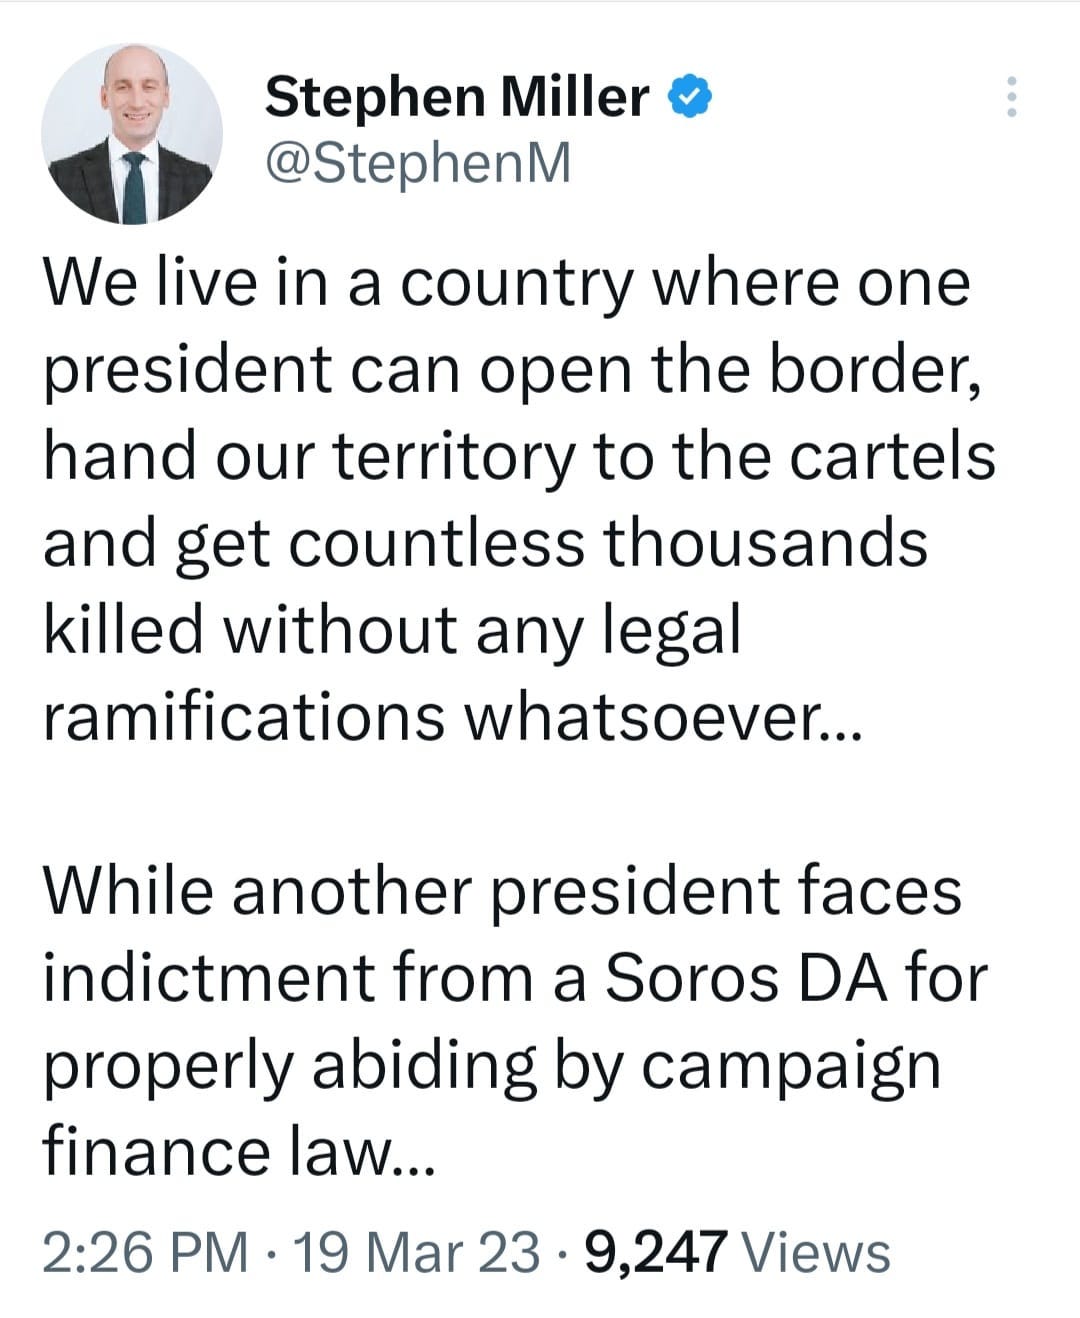 May be an image of 1 person and text that says 'Stephen Miller @StephenM We live in a country where one president can open the border, hand our territory to the cartels and get countless thousands killed without any legal ramifications whatsoever... While another president faces indictment from a Soros DA for properly abiding by campaign finance law... 2:26 PM 19 Mar 23 9,247 Views'